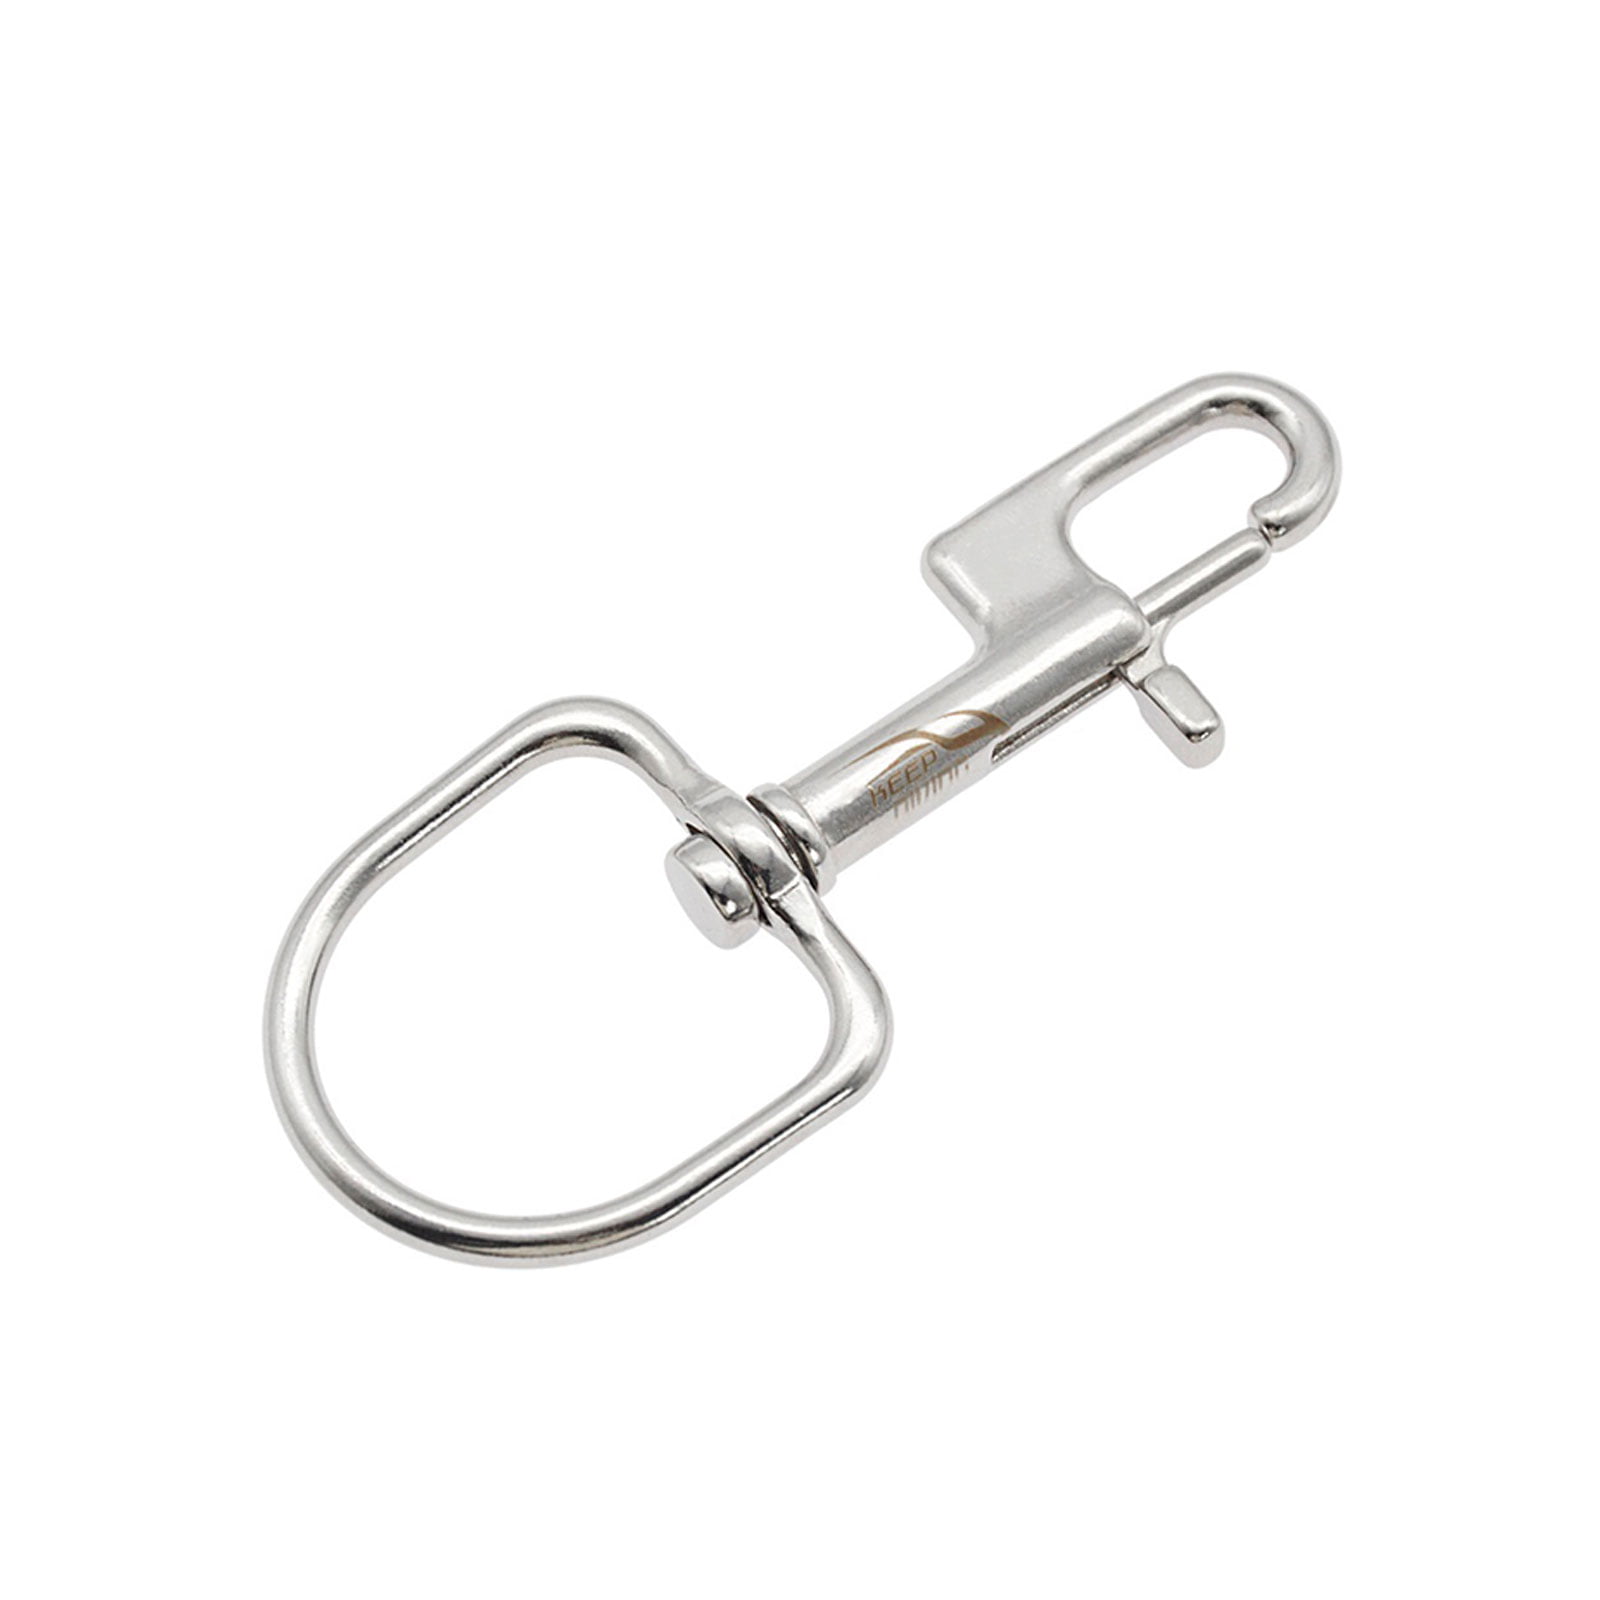 Double End Clips hook 4'' long 